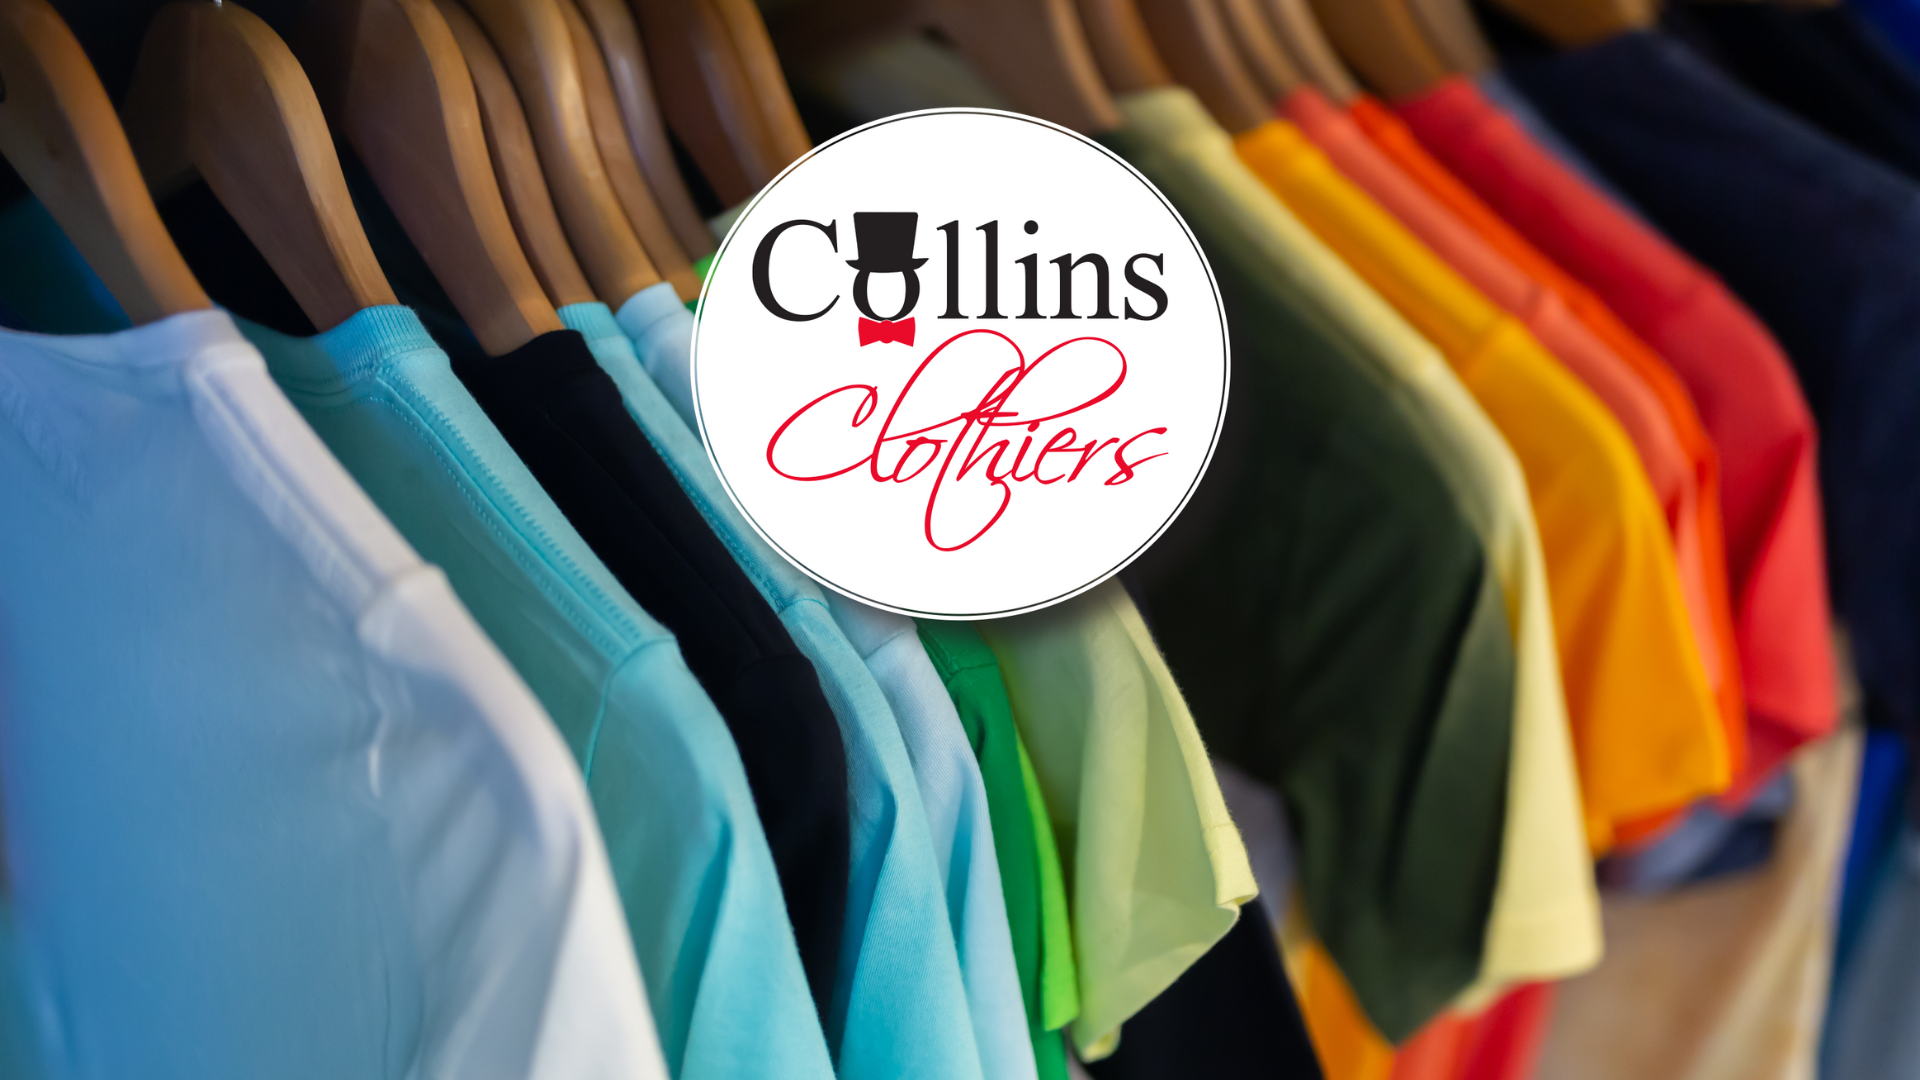 Colourful shirts on a clothing rack with the Collins Clothiers logo overlaid on top.